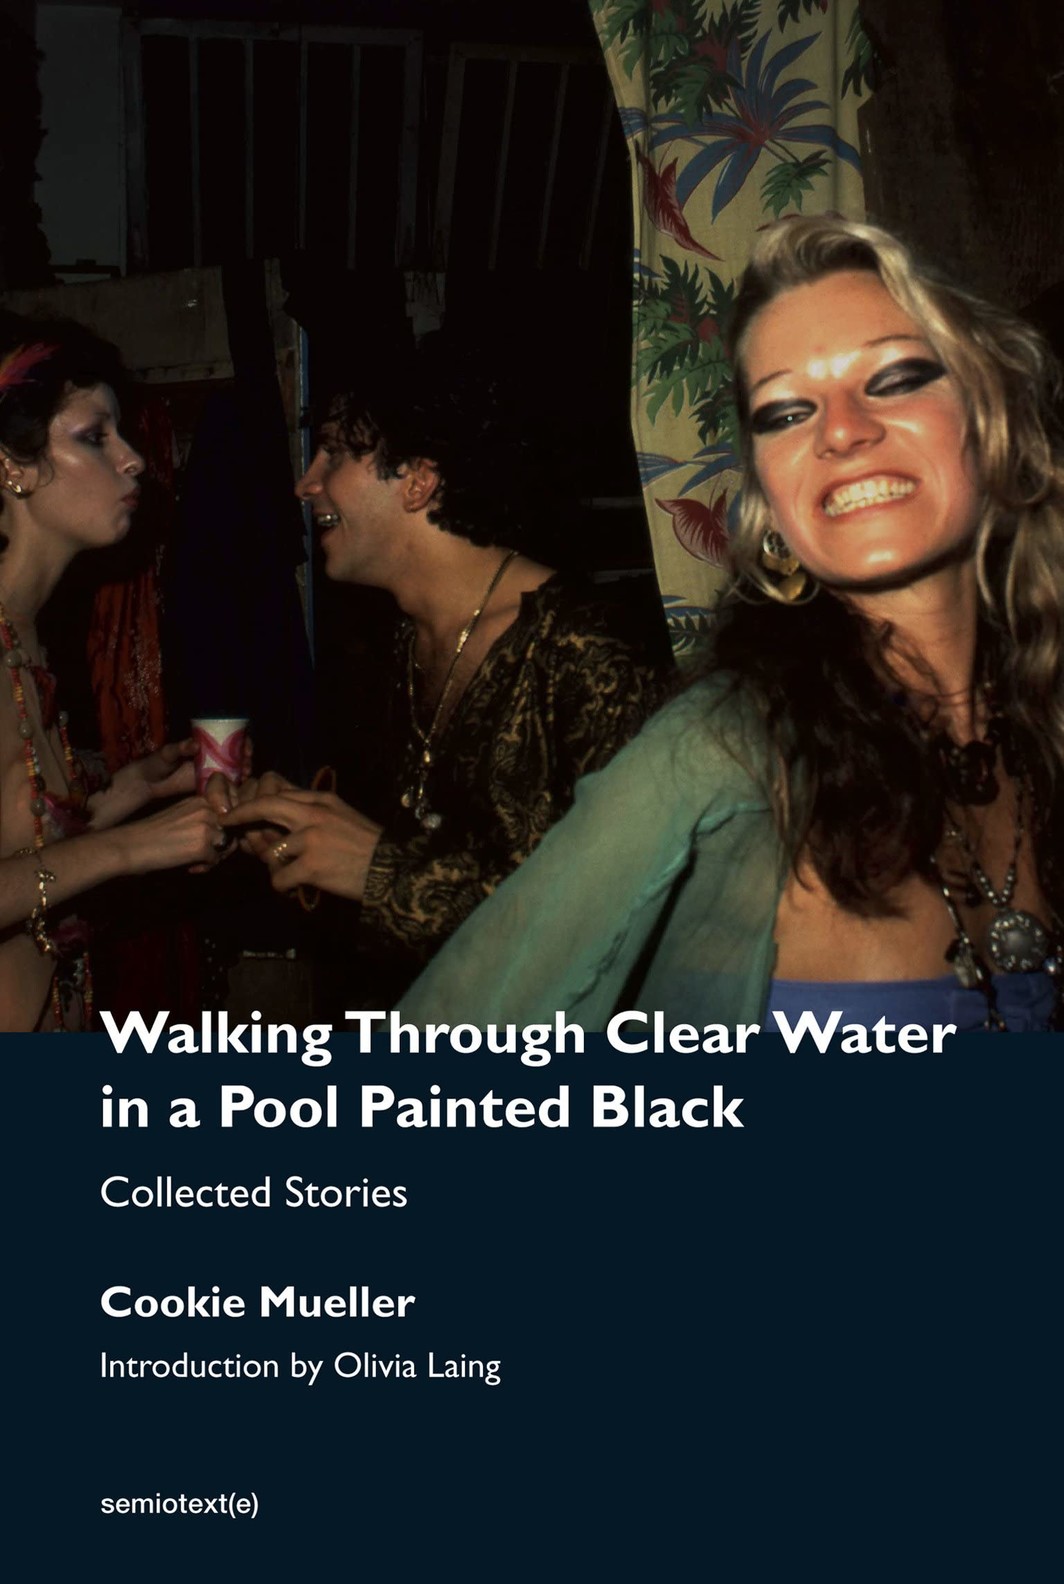 The cover of Walking Through Clear Water in a Pool Painted Black